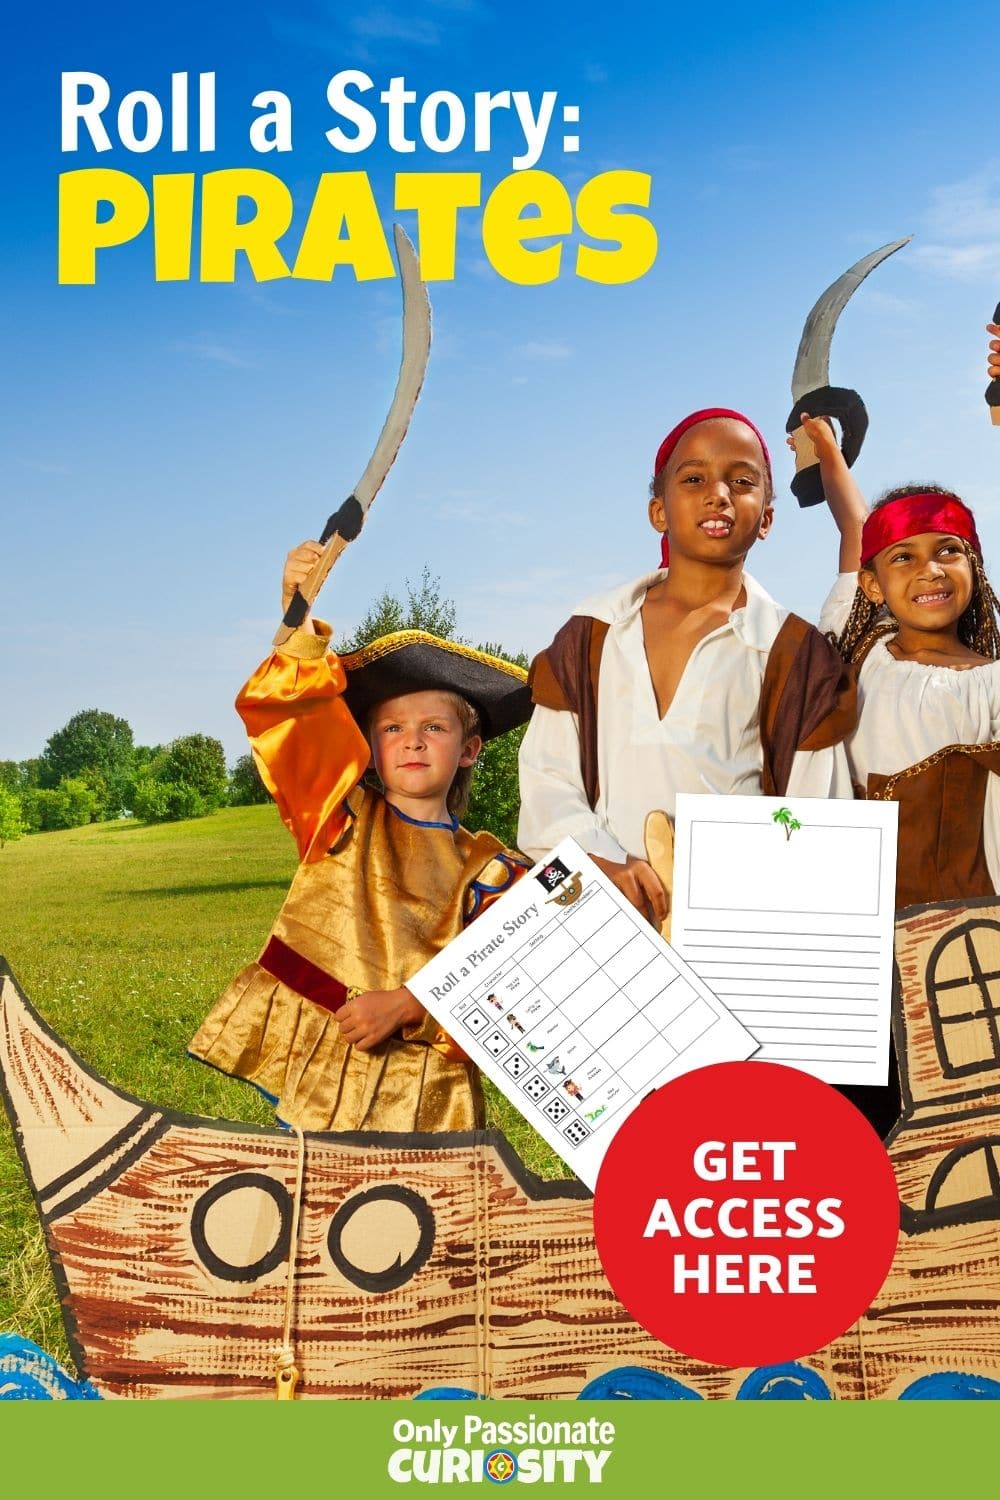 Celebrate Talk Like a Pirate Day (or any day!) with this fun roll-a-story activity! It's a perfect way to sneak in some creative writing with your kids!